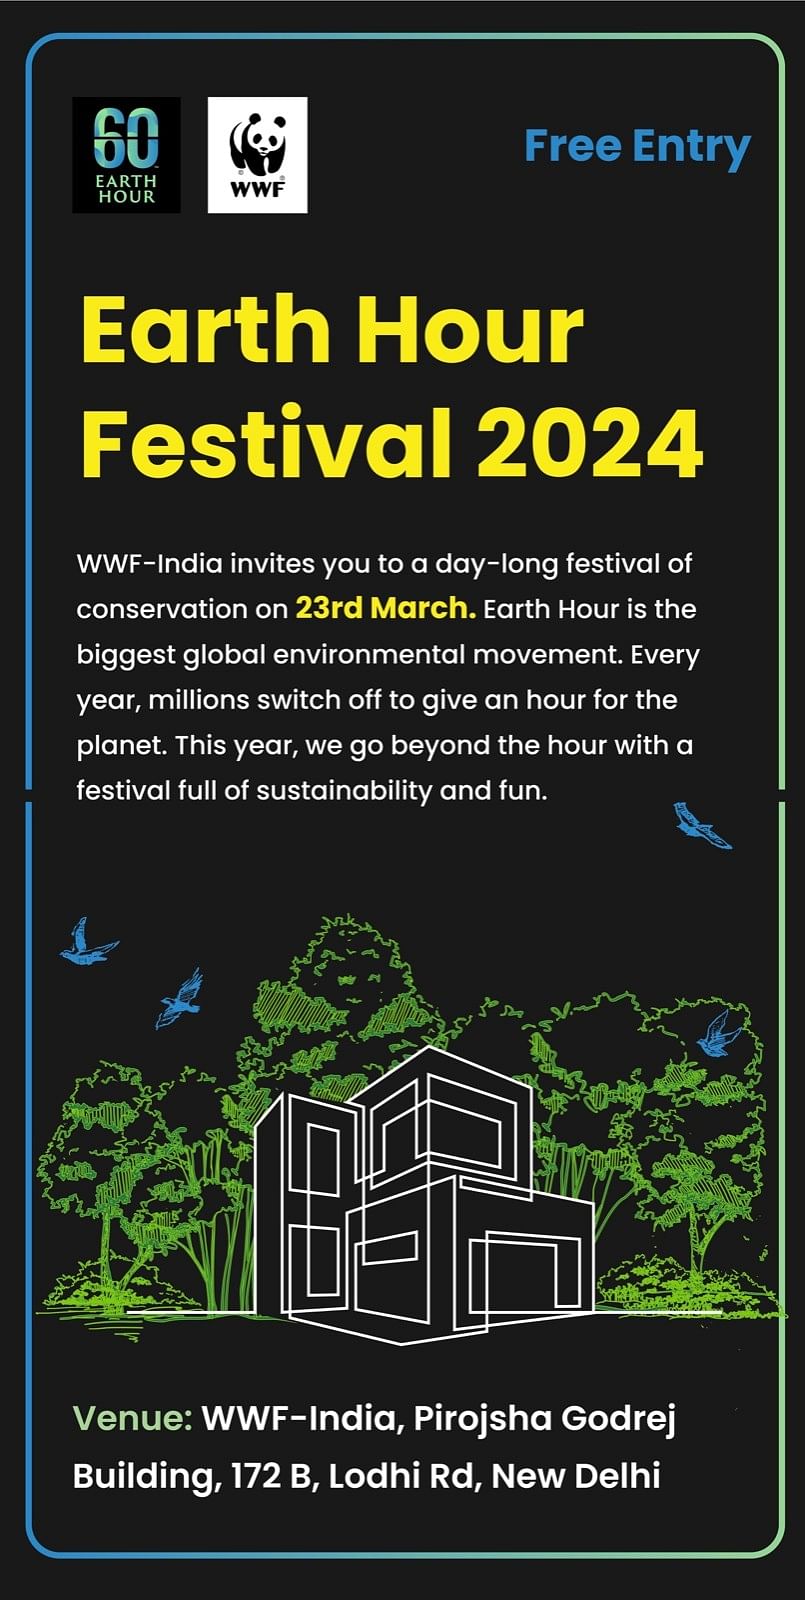 Earth Hour Festival 2024 in New Delhi India: Check date, timing, venue, events, and other details.